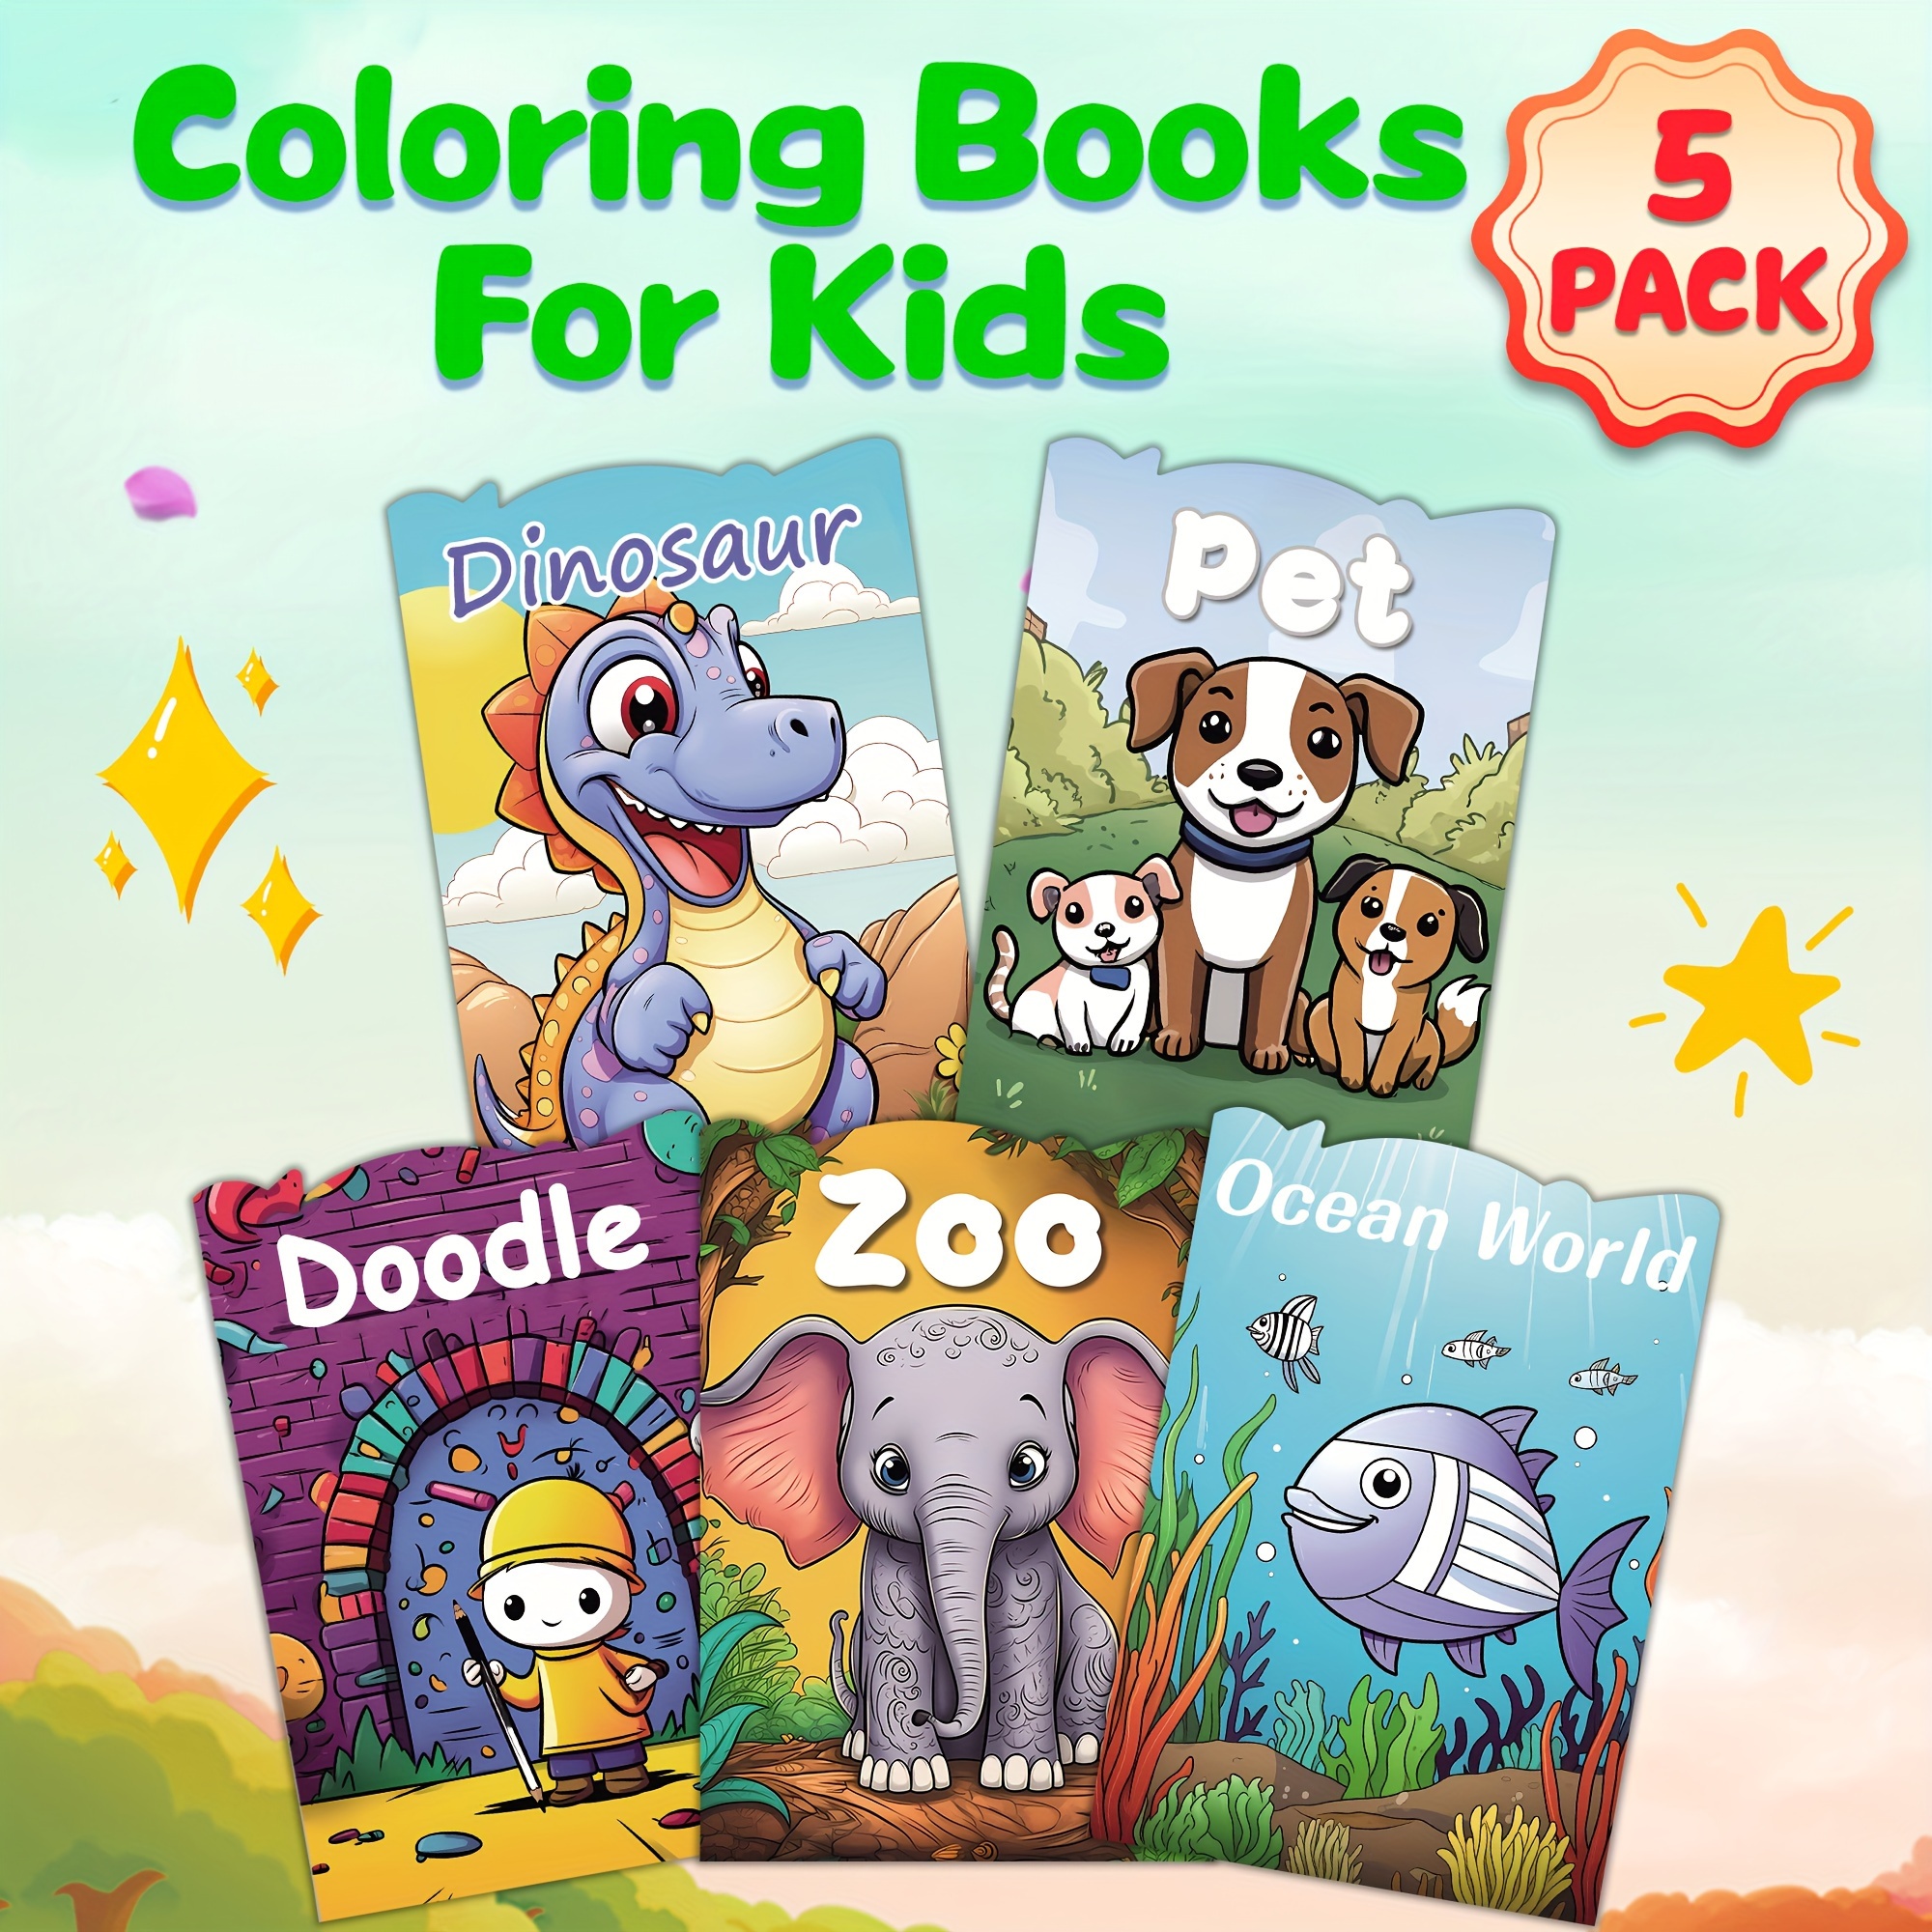 

5 Books Coloring Books For Kids – Zoo, Dinosaur, Doodle, Ocean World, Pet Themes - Educational And Fun Activities For Children Ages 3+ - Boys And Girls